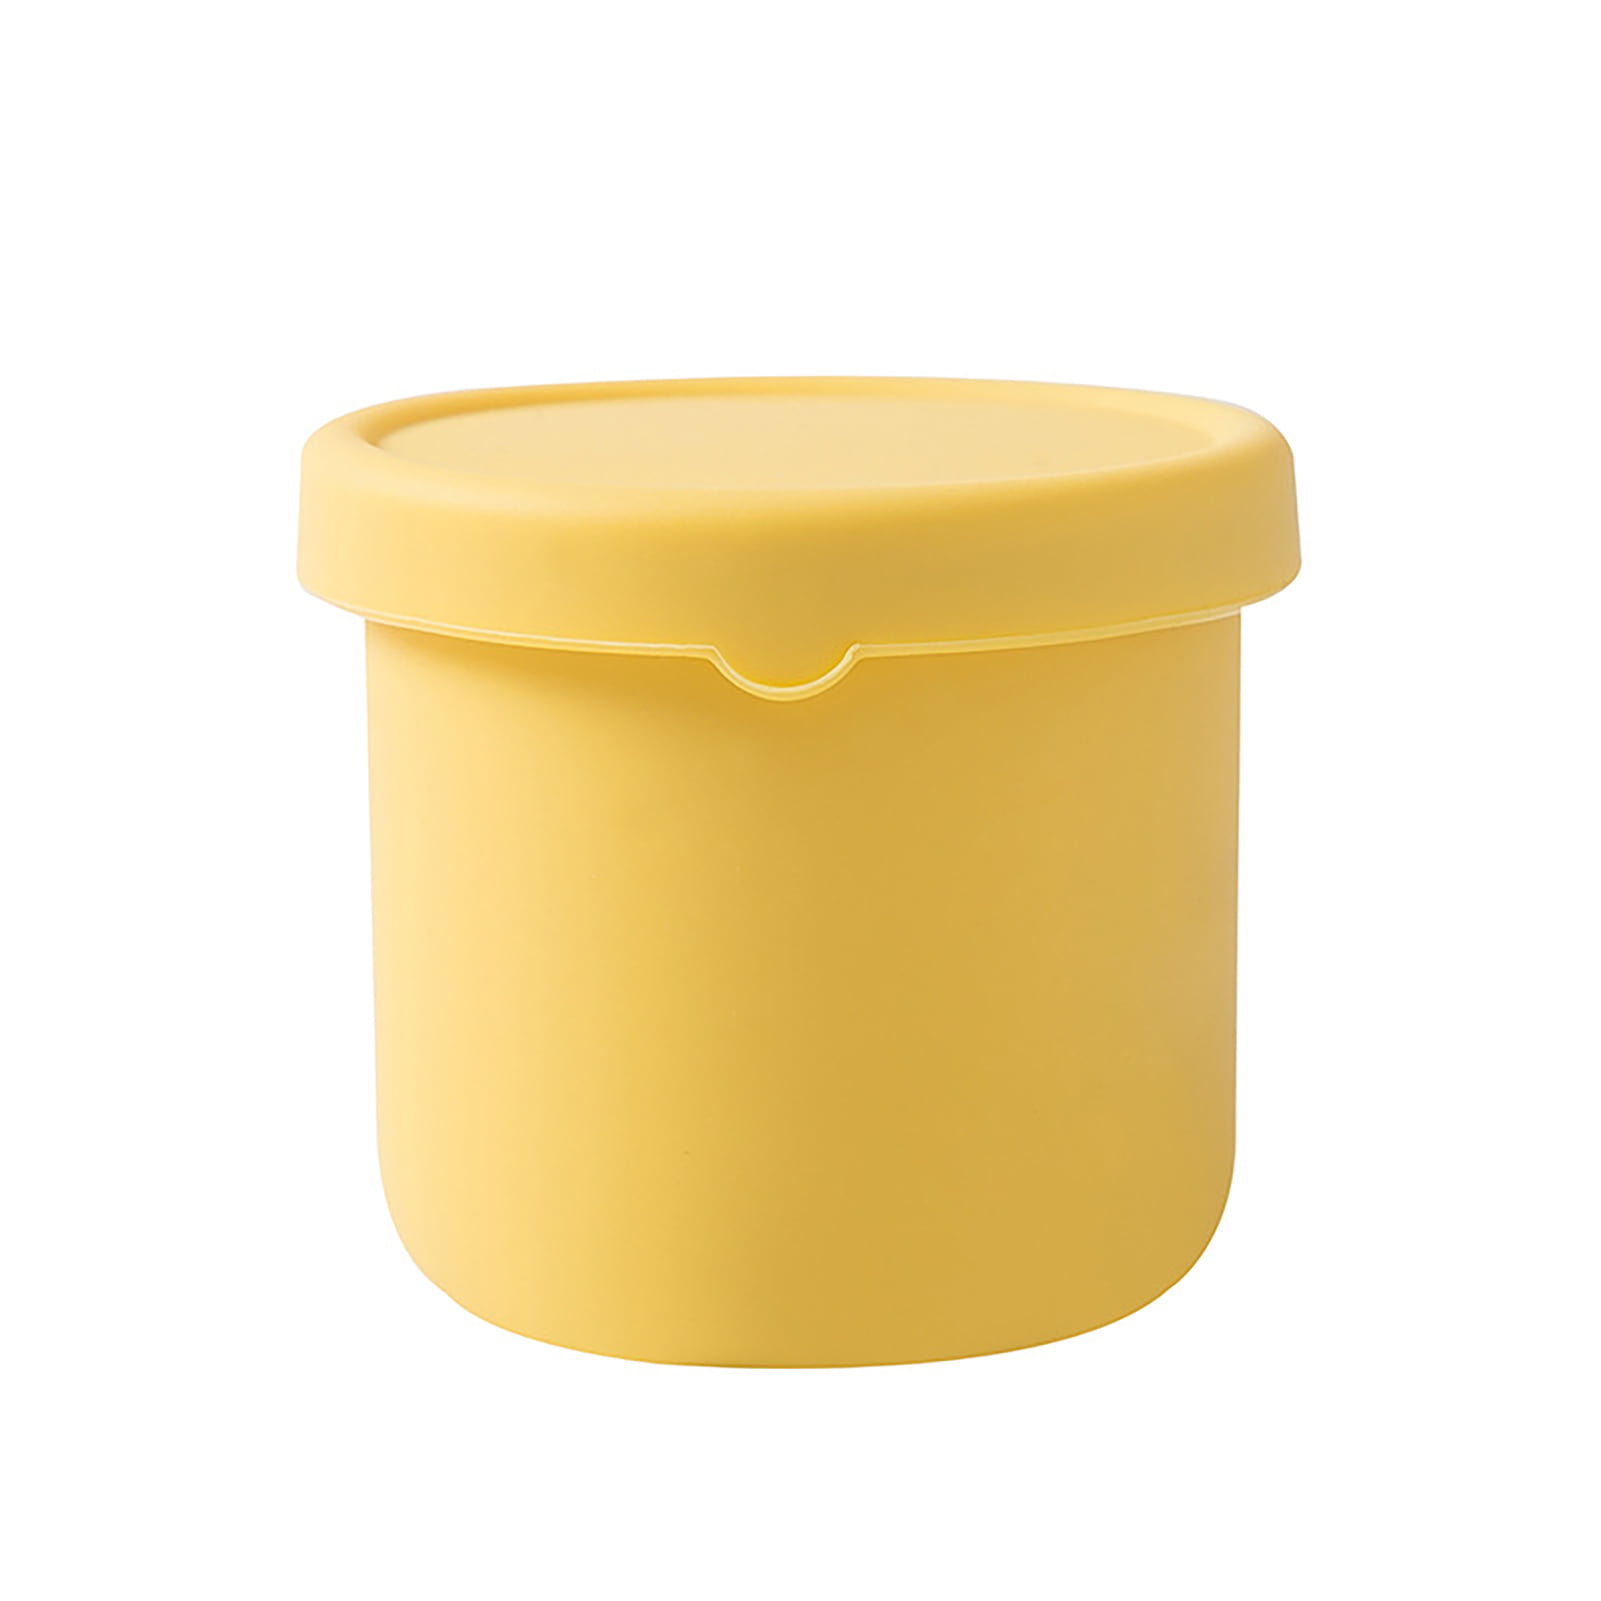 Salad Dressing Containers To Go with Leakproof Silicone Lids, 250